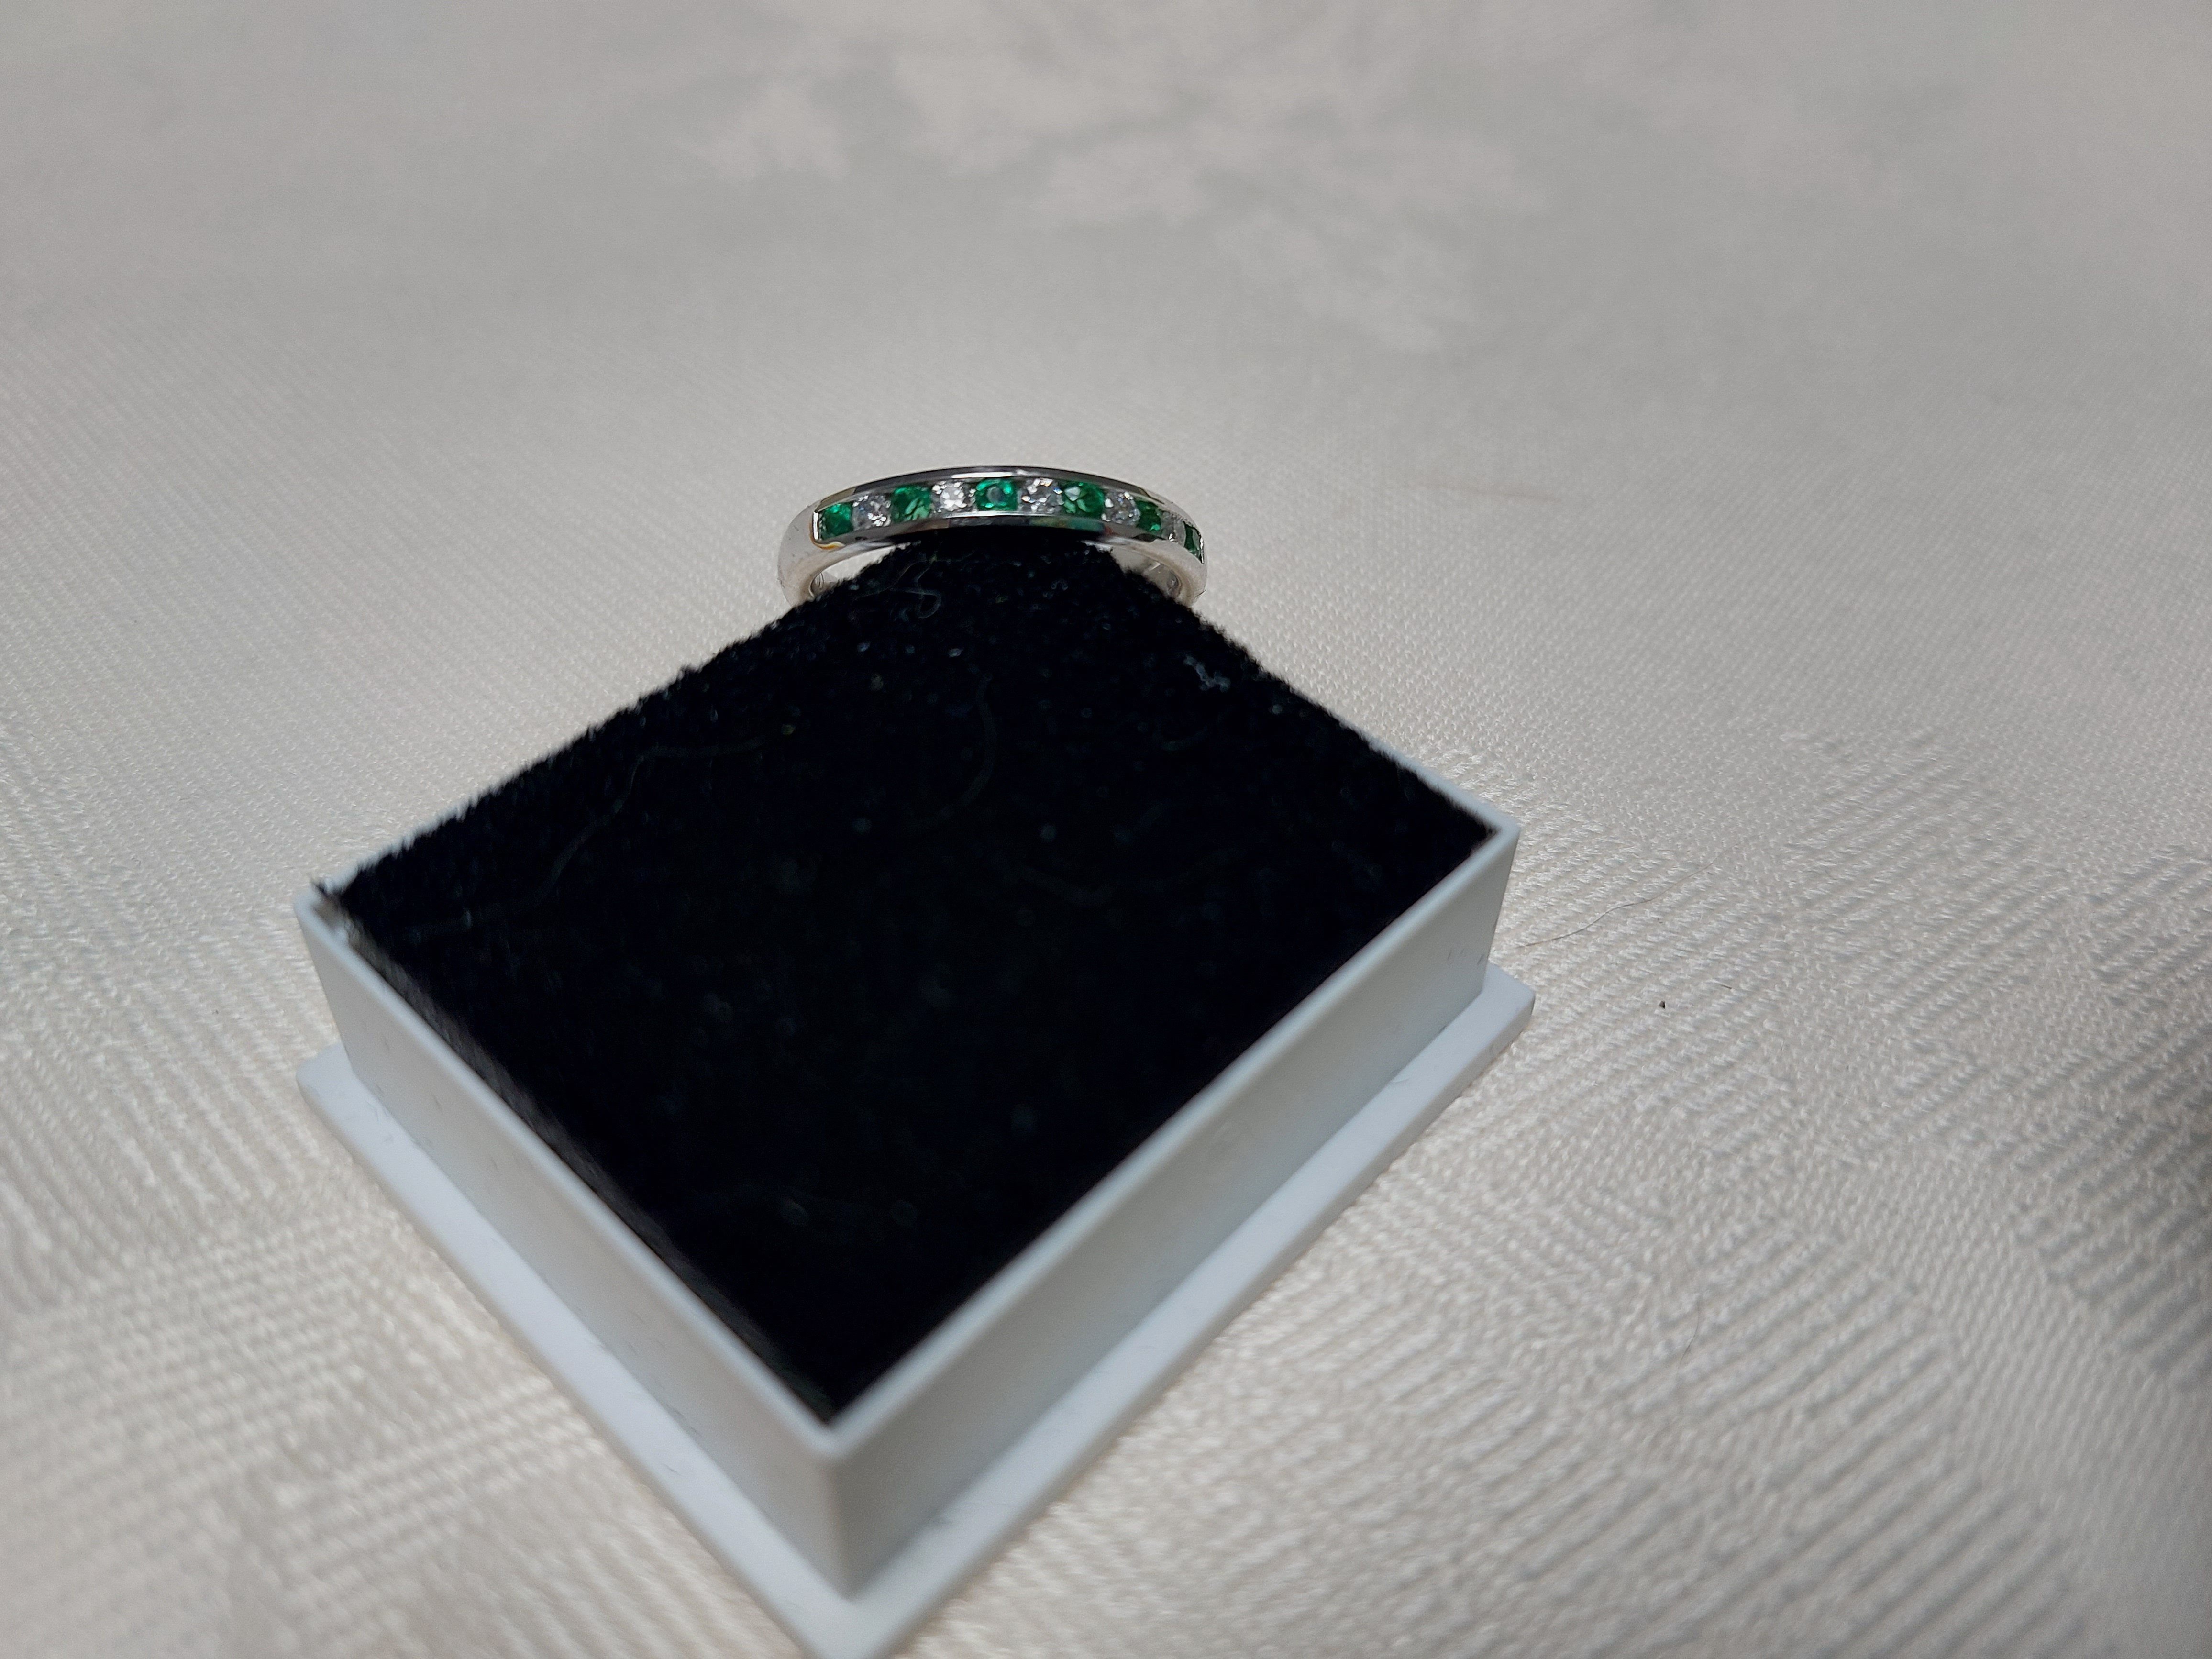 Silver Eternity/Wedding Band With Blue And Green Coloured Cz Stones Size N. RRP £189 199